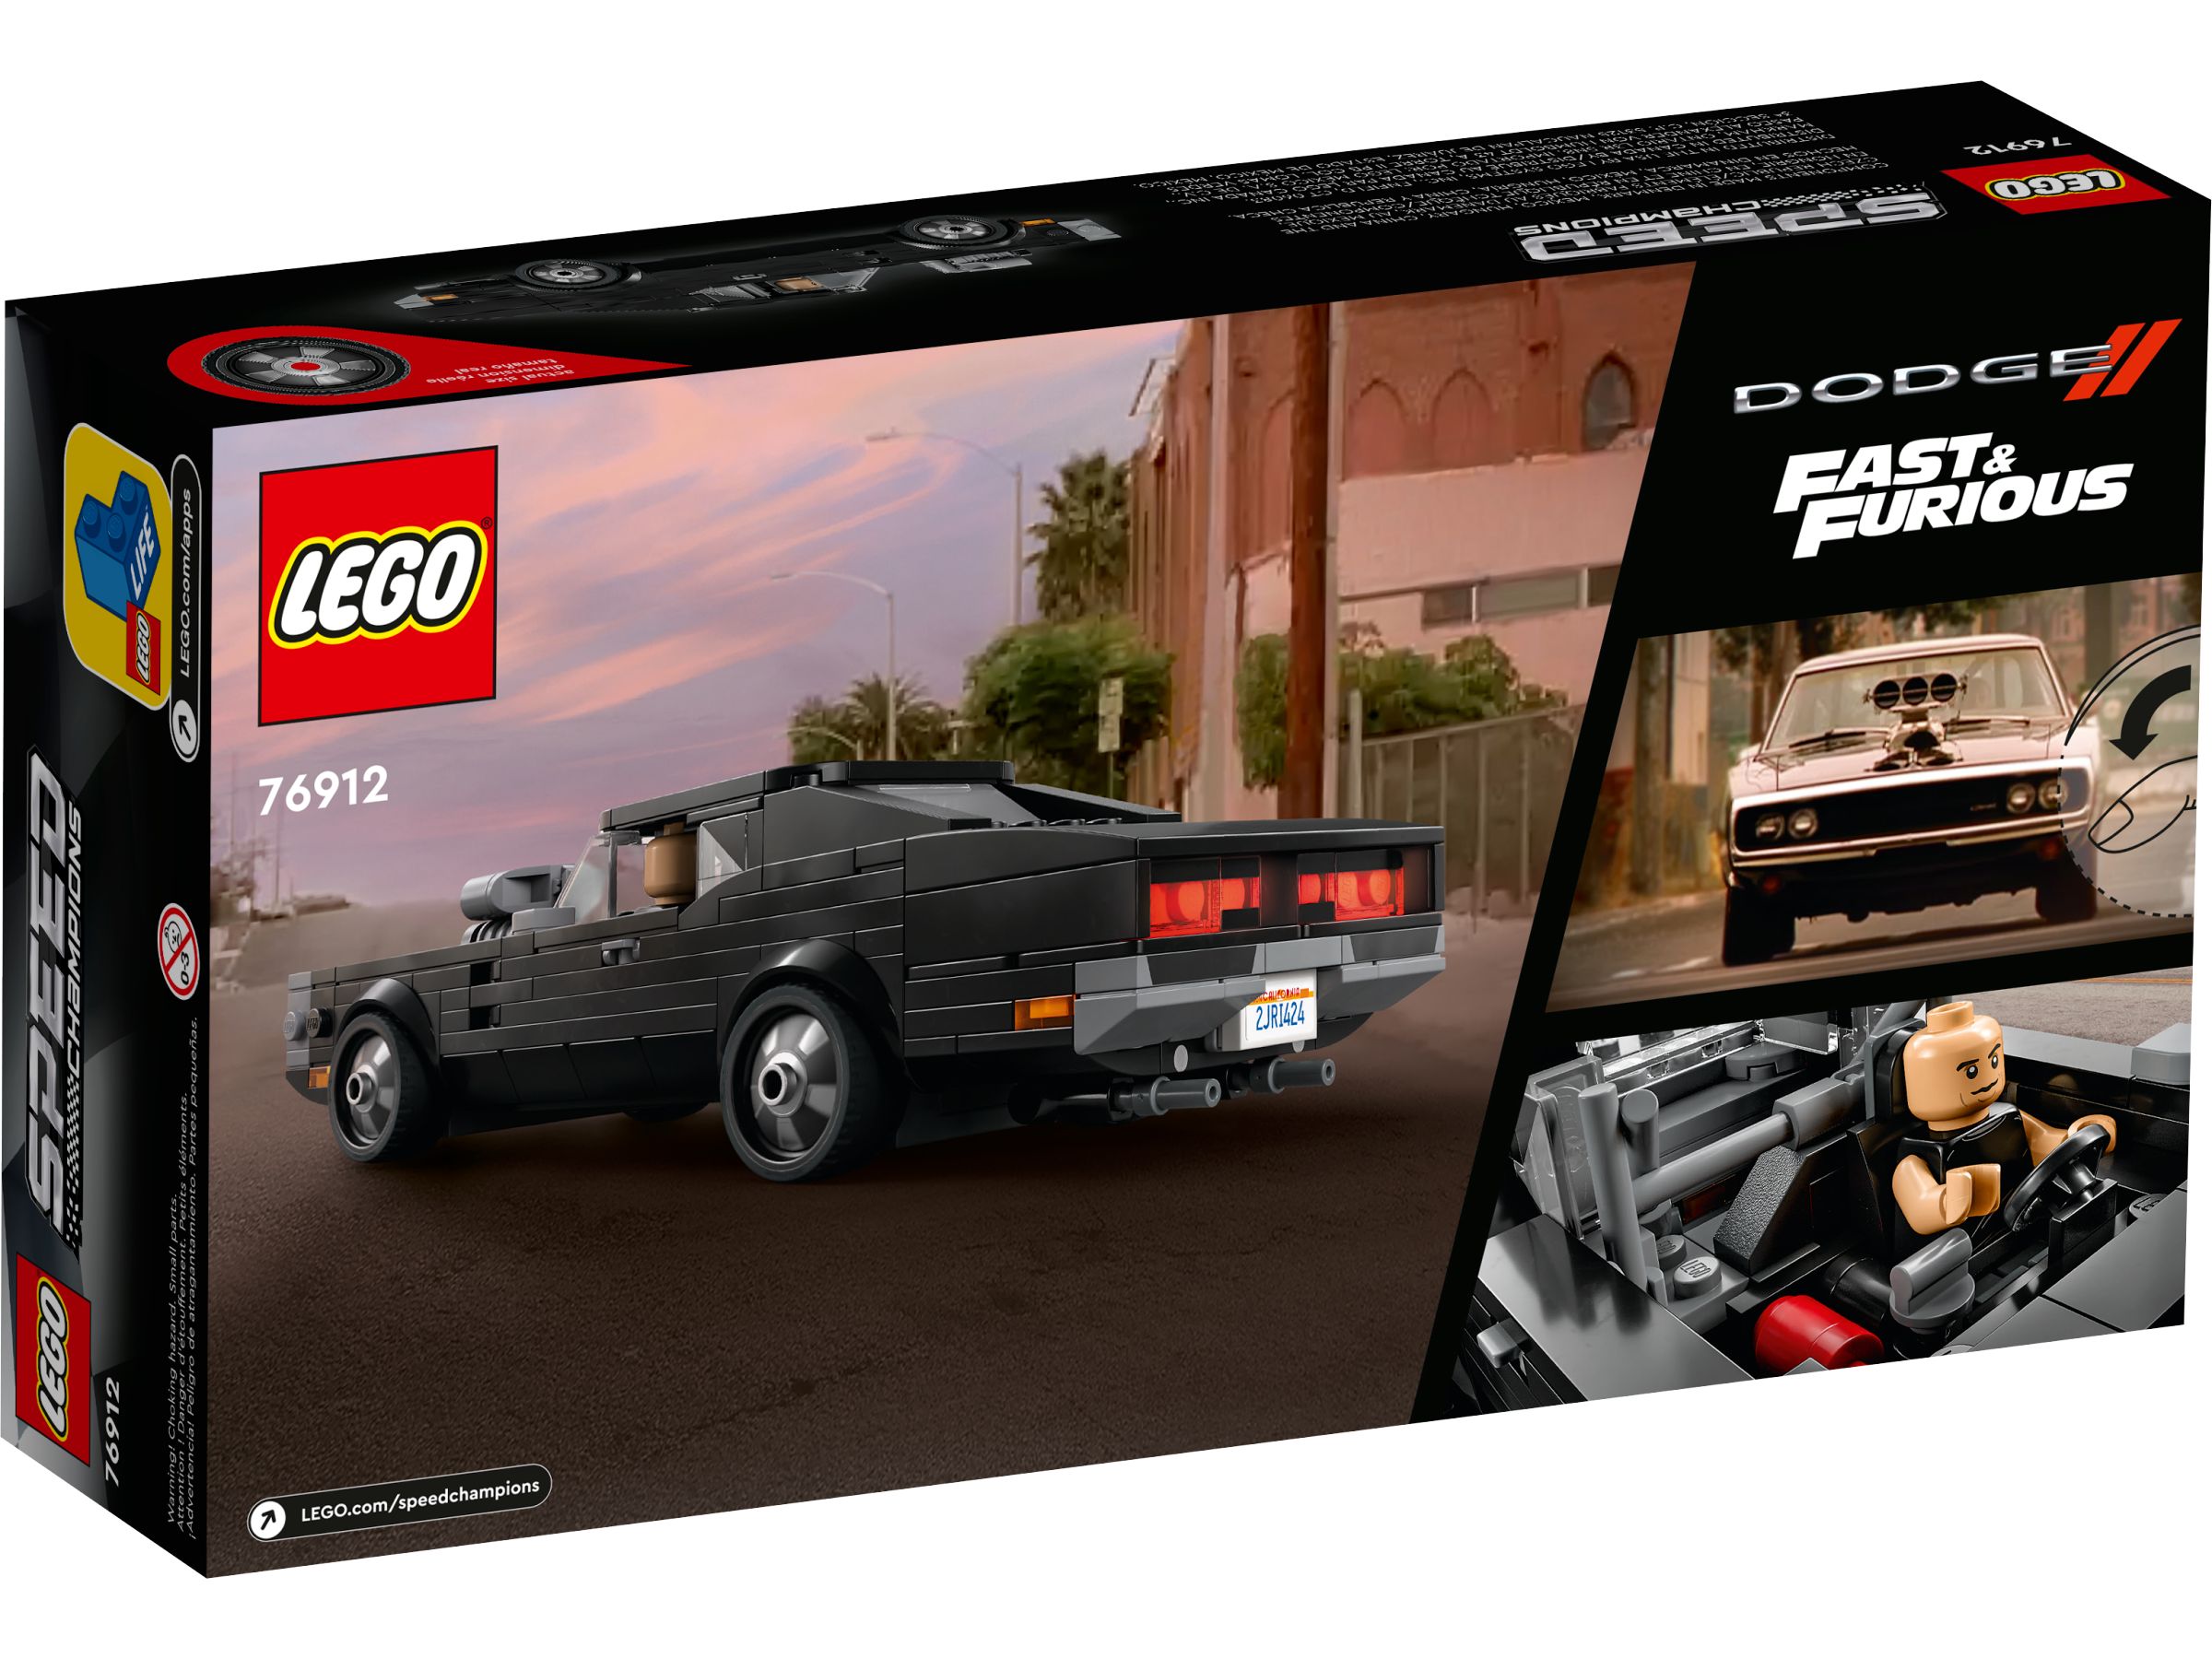 LEGO Speed Champions 76912 Fast & Furious 1970 Dodge Charger R/T LEGO_76912_alt7.jpg